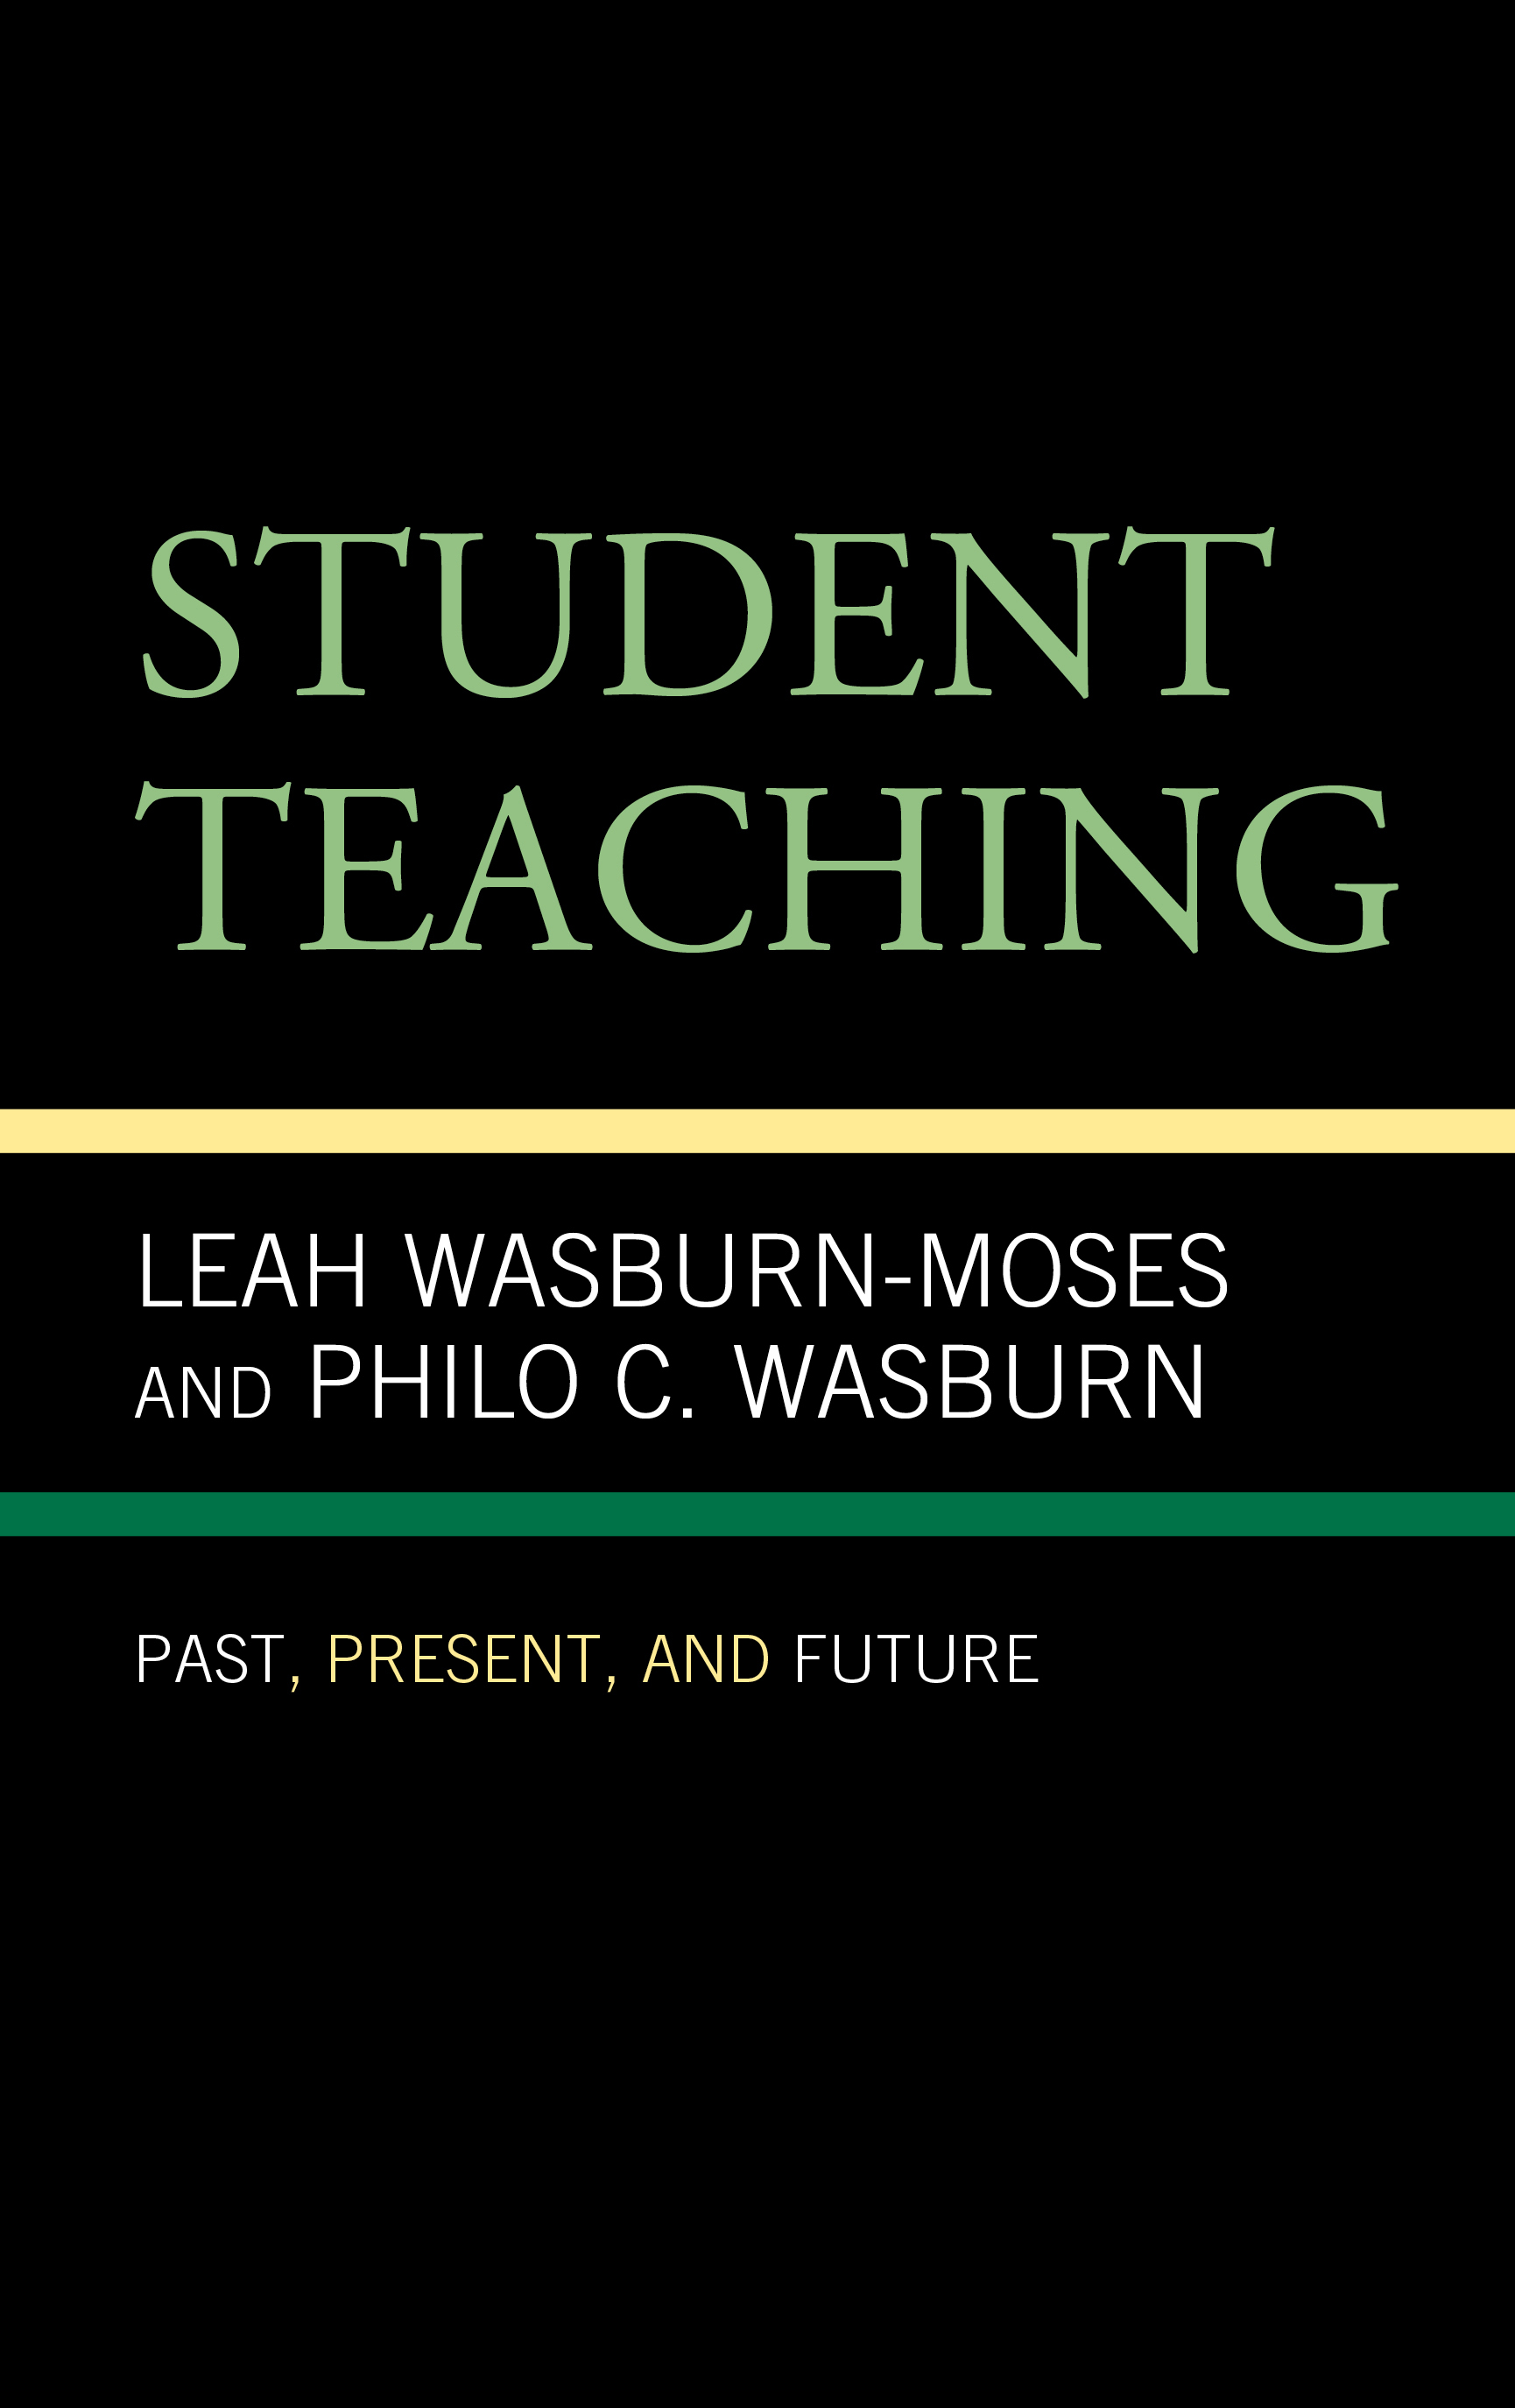 Student Teaching: Past, Present, and Future